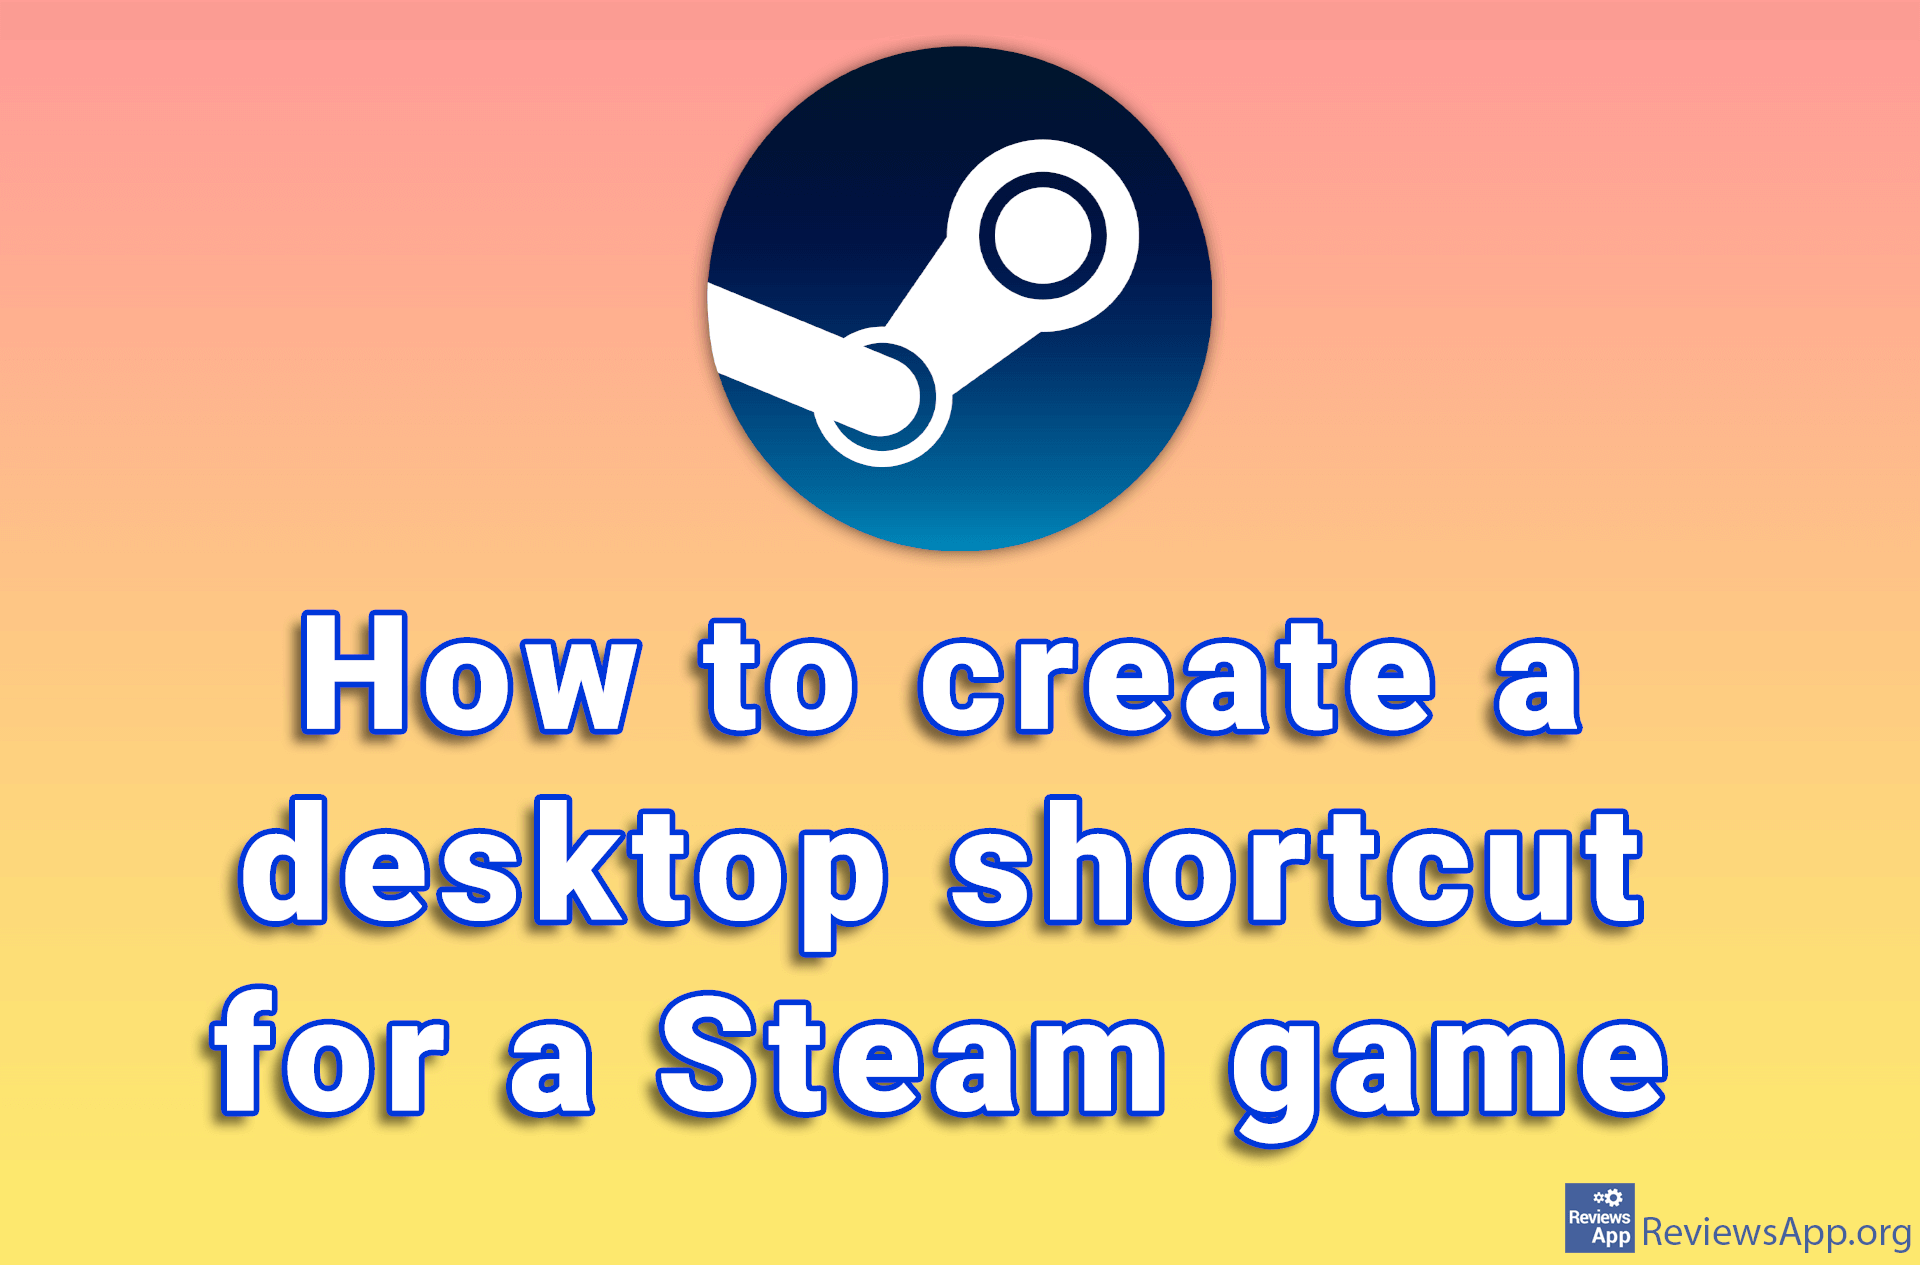 How to create a desktop shortcut for a Steam game